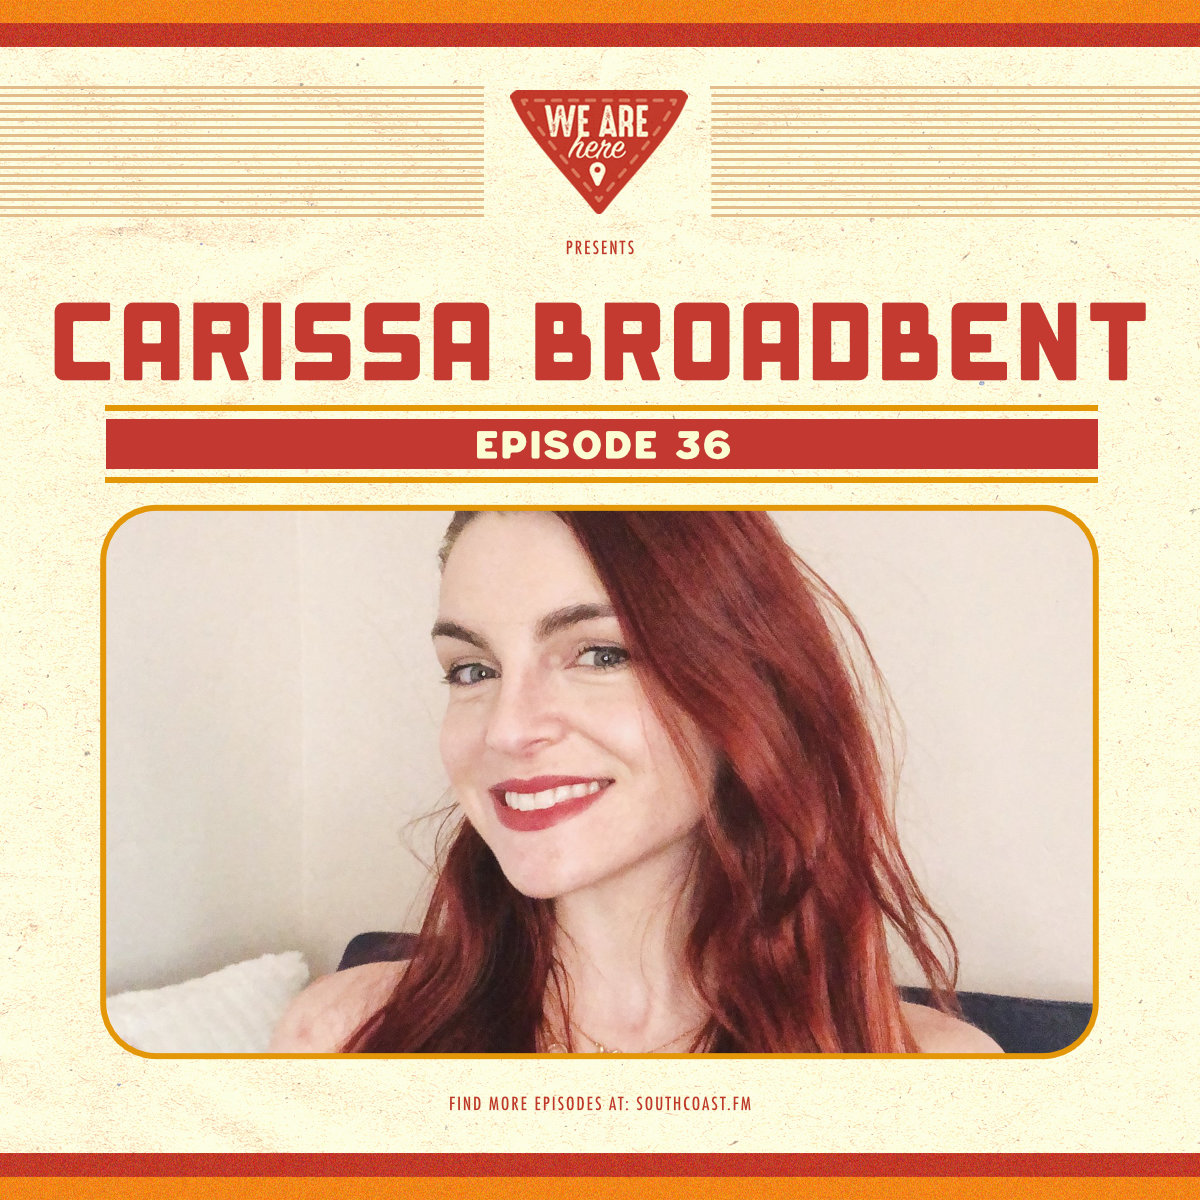 Carissa Broadbent is pursuing her fantasy on the South Coast